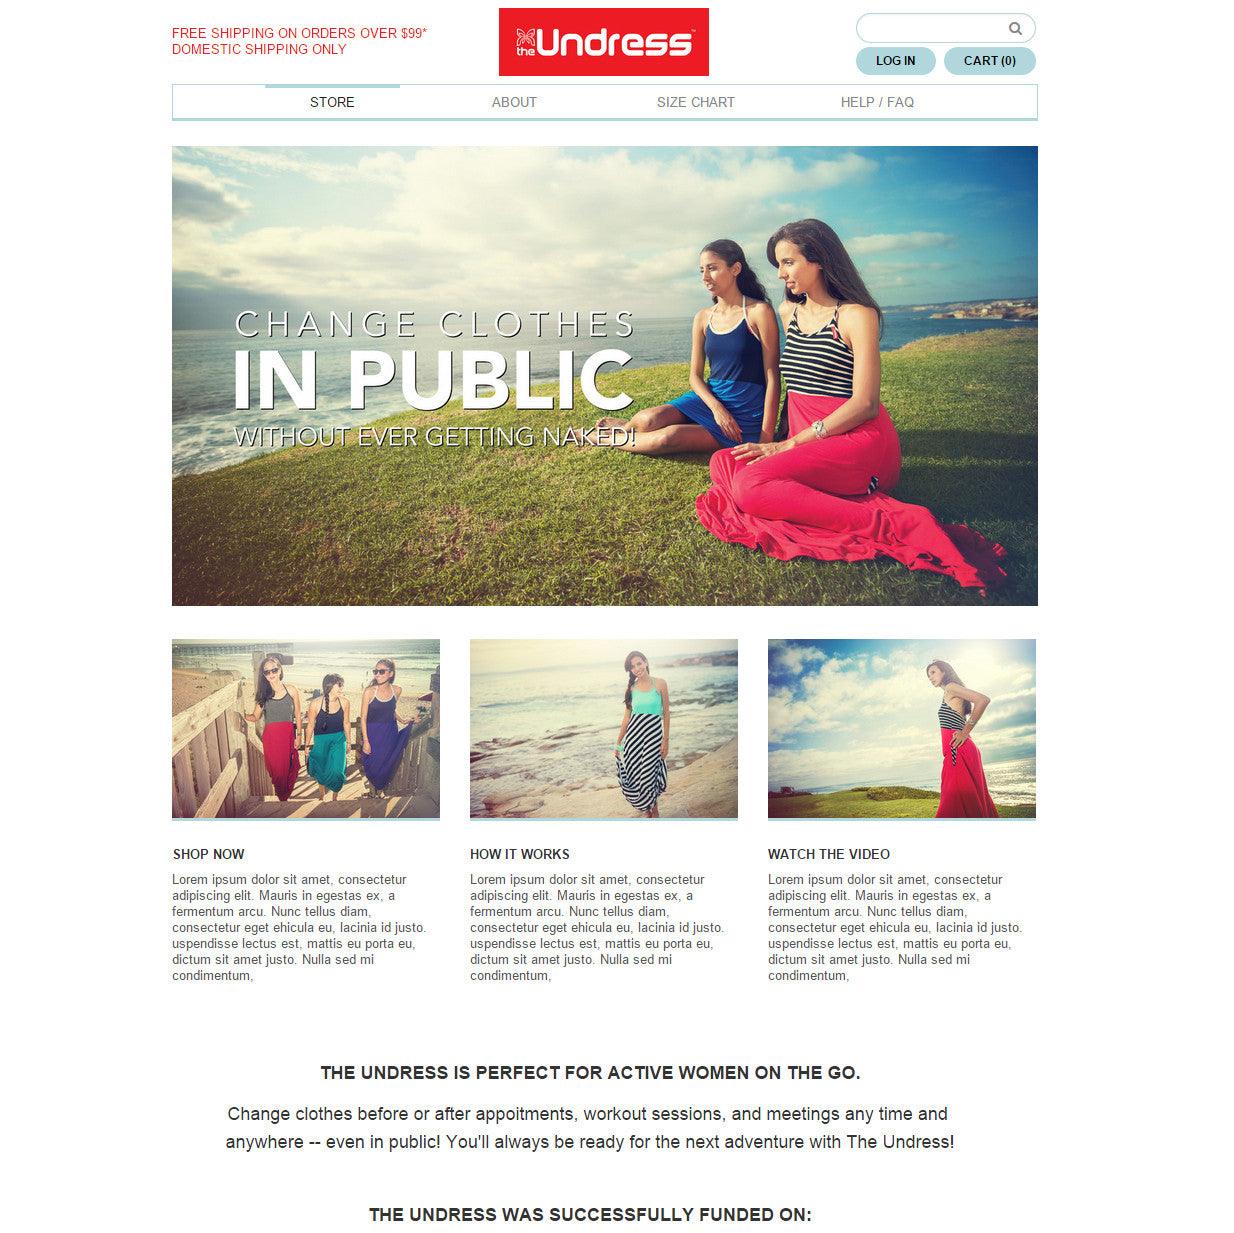 The Undress - Photography and Web Design - Los Angeles, US based Shopify Experts Revo Designs